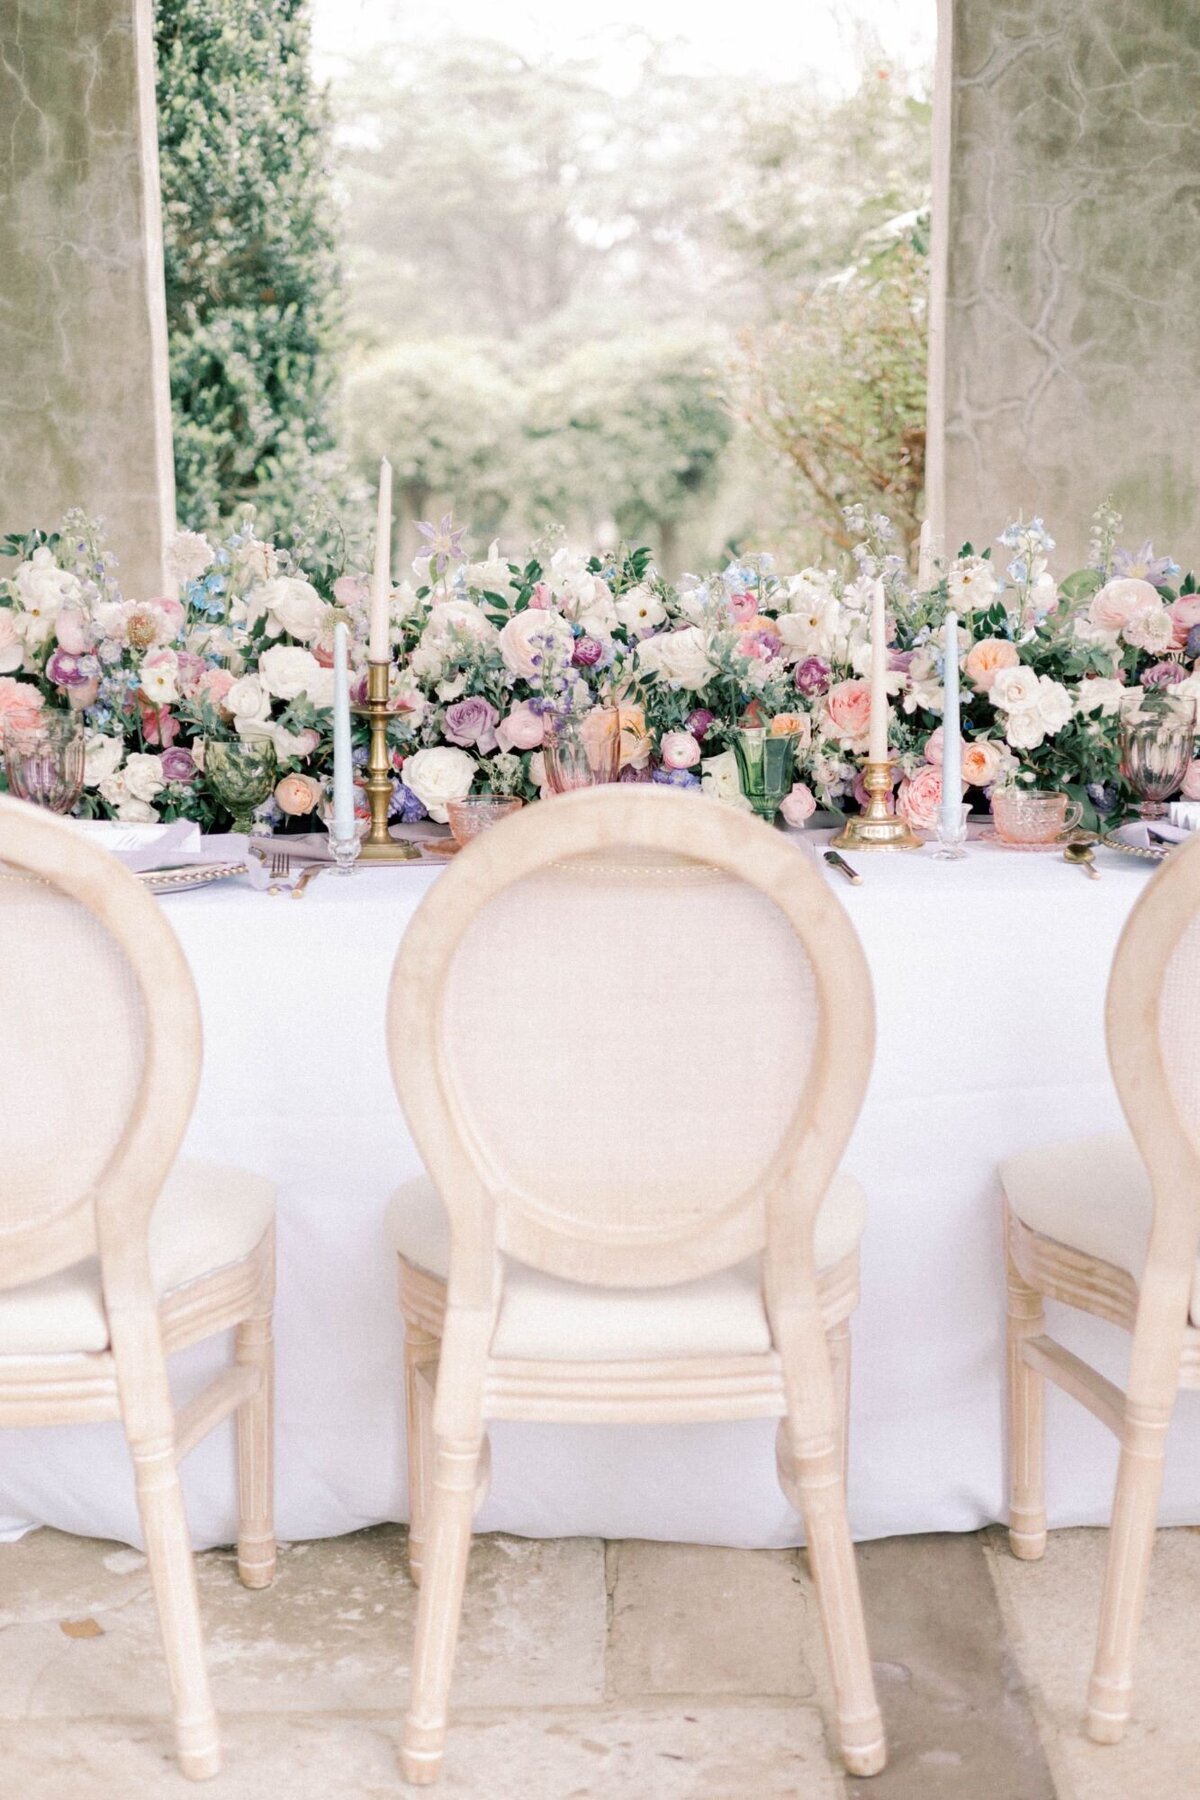 Wedding chair at table with large bouquets of flowers.